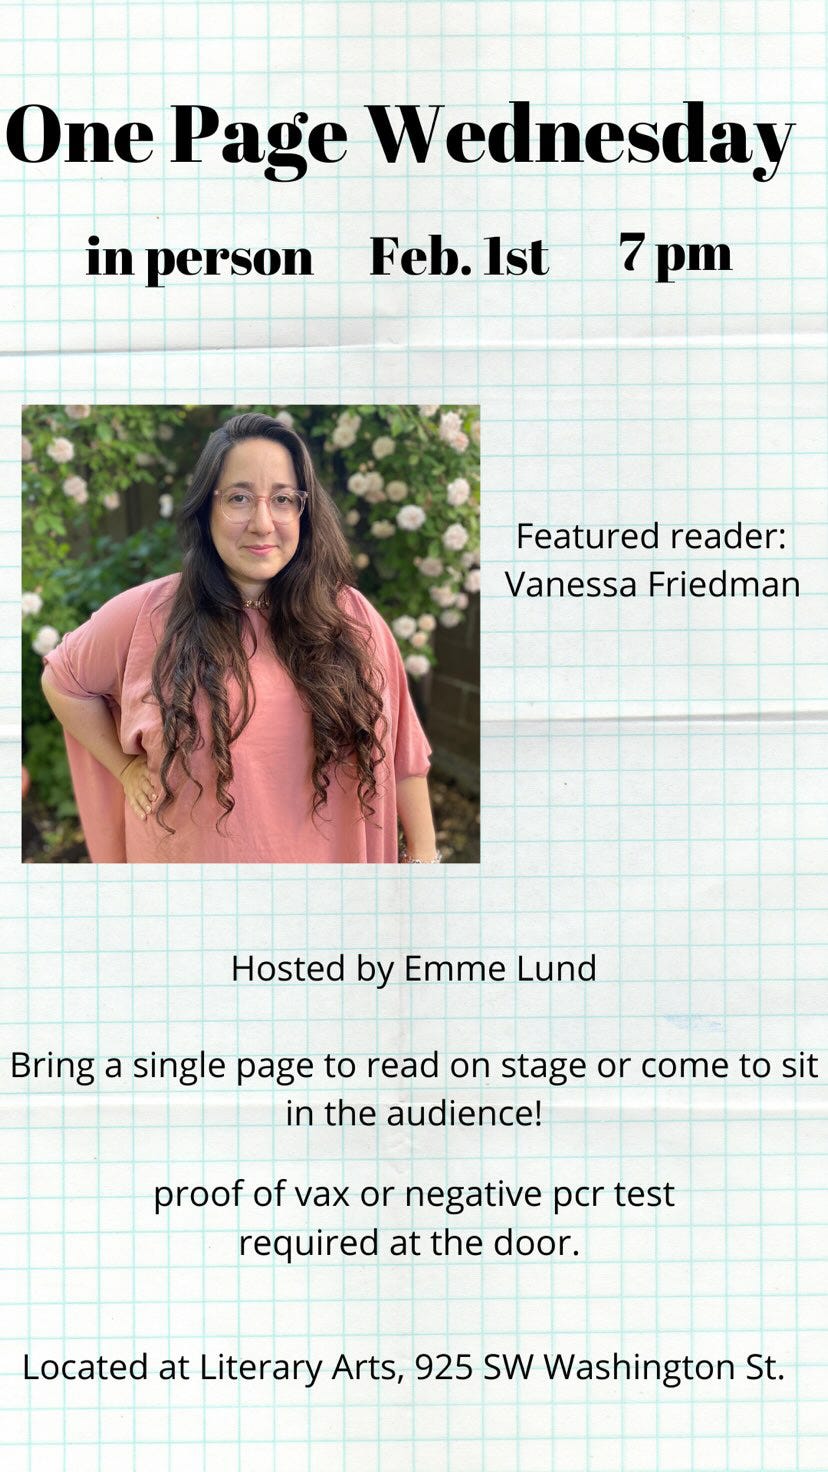 flyer reads: One Page Wednesday in person, Feb 1, 7pm. Featured reader: Vanessa Friedman. Hosted by Emme Lund. Bring a single page to read on stage or come to sit in the audience! Proof of vax or negative PCR test required at the door. Located at Literary Arts, 925 SW Washington St.